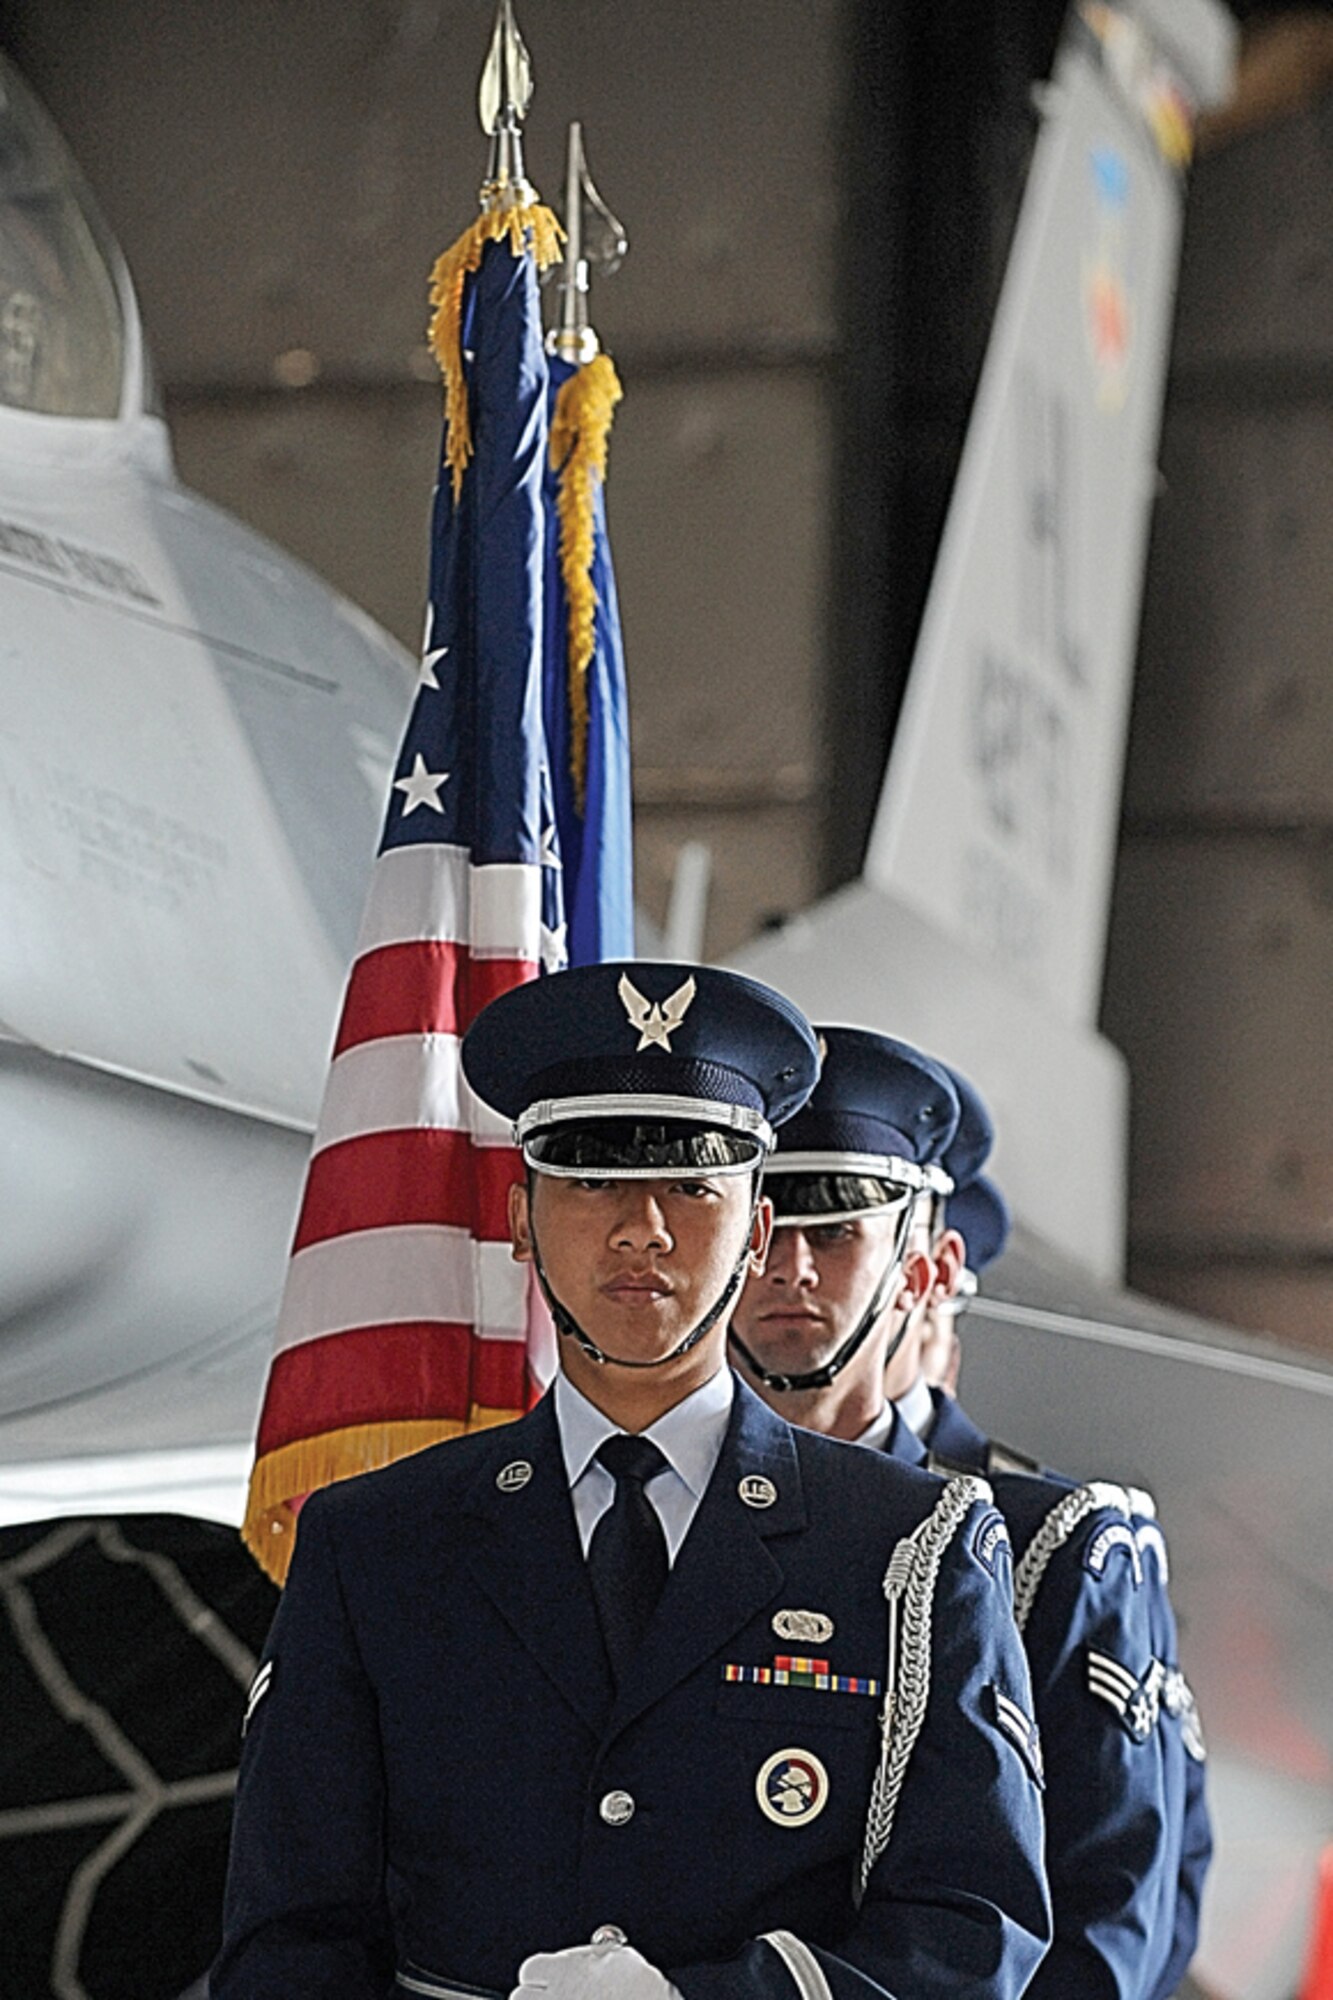 The Hill Air Force Base Honor Guard stand beside the 421st Fighter Squadron F-16 Fighting Falcon in Hangar 37 before a memorial service June 26 for Capt. George Houghton.  Captain Houghton, 421st FS pilot, died during an F-16 accident at the Utah Test and Training Range June 22.